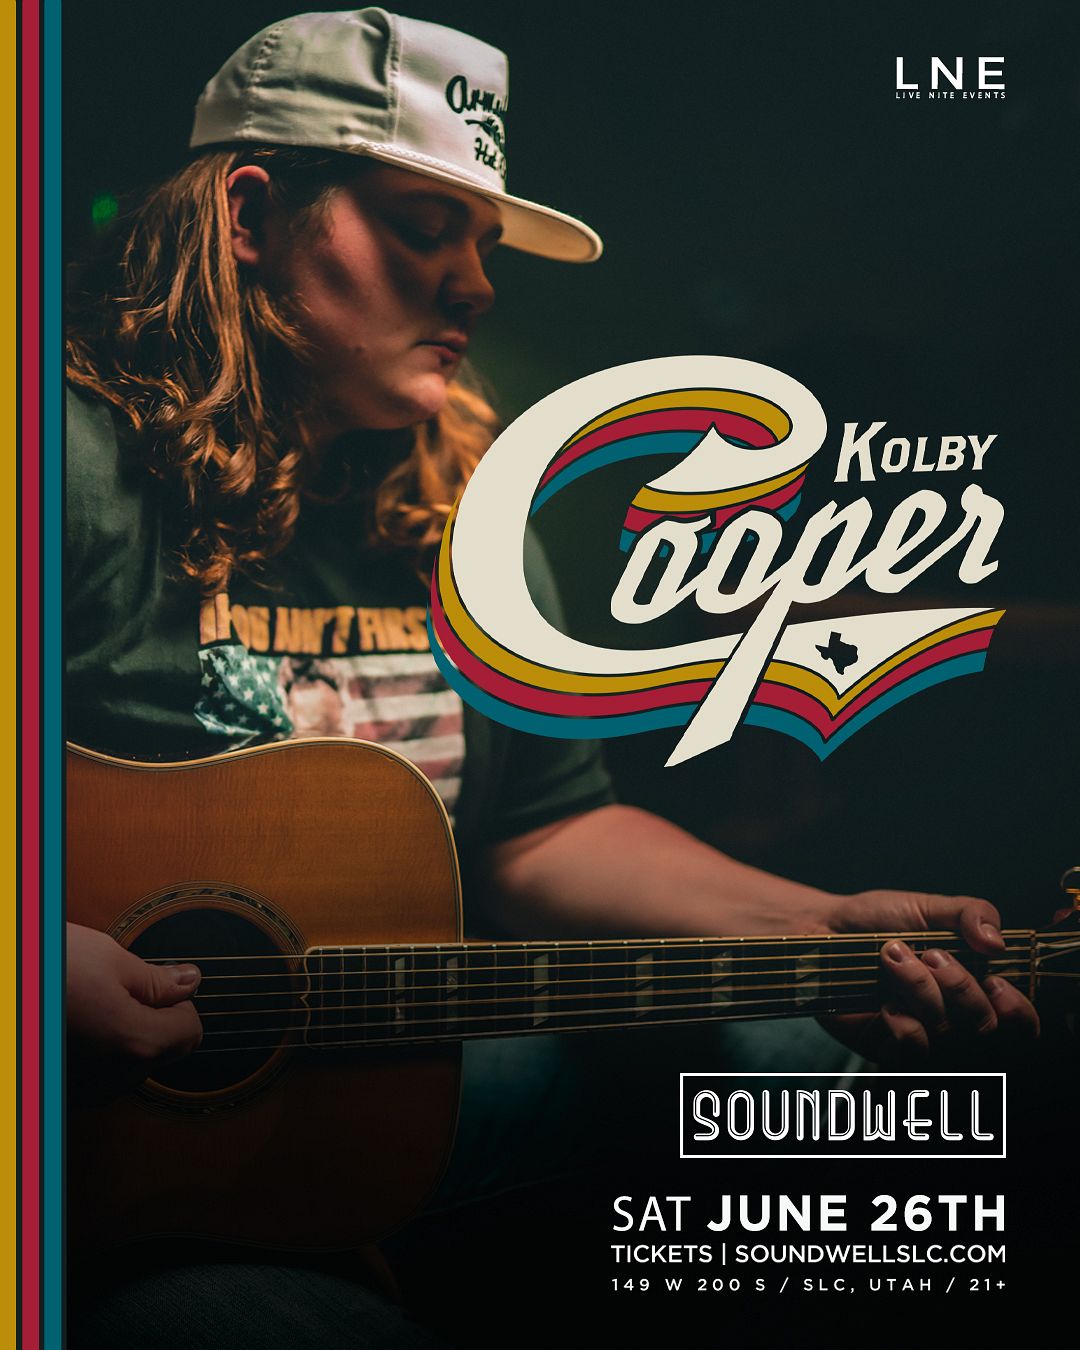 Kolby Cooper at Soundwell Tickets at Soundwell in Salt Lake City by Soundwell Tixr